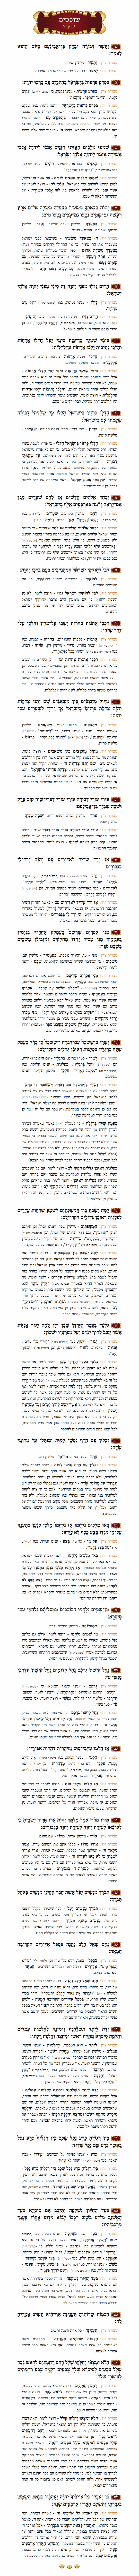 Sefer Shoftim Chapter 5 with commentary